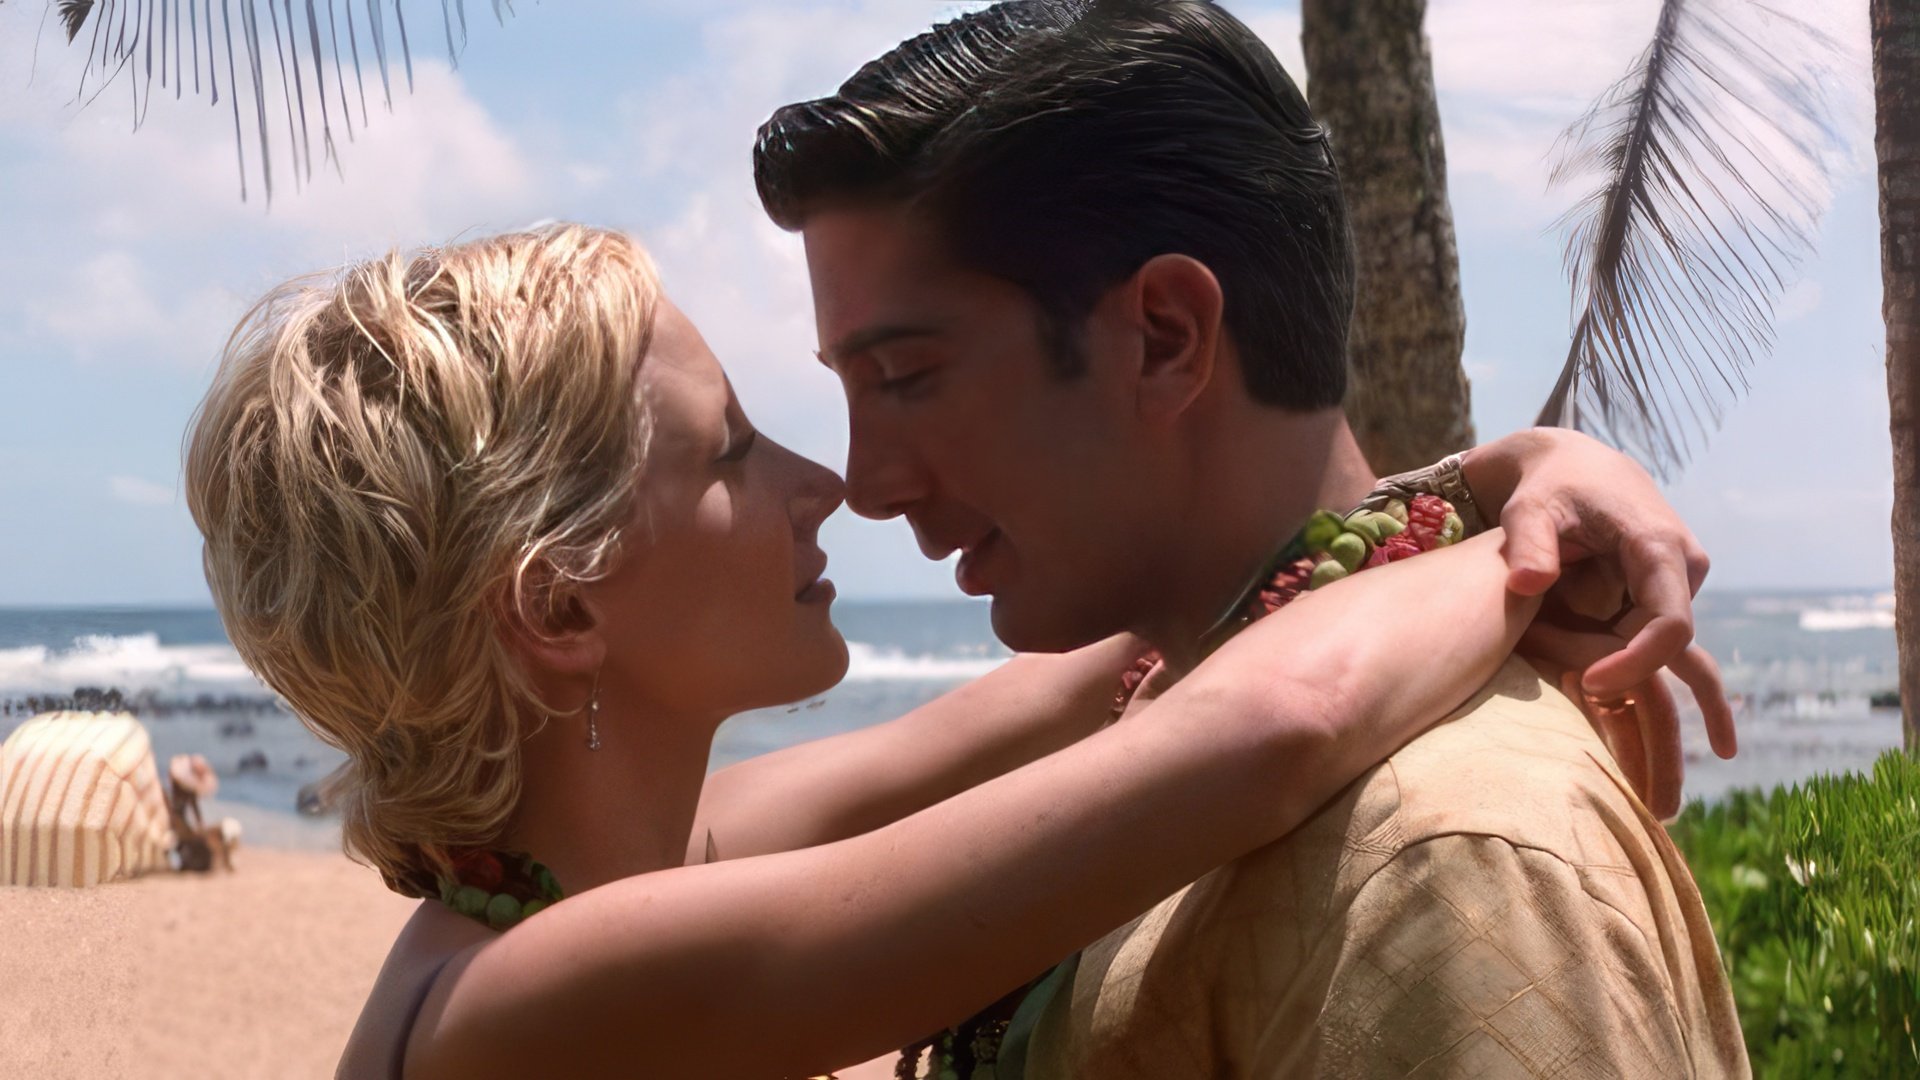 David Schwimmer and Anne Heche in 'Six Days, Seven Nights'